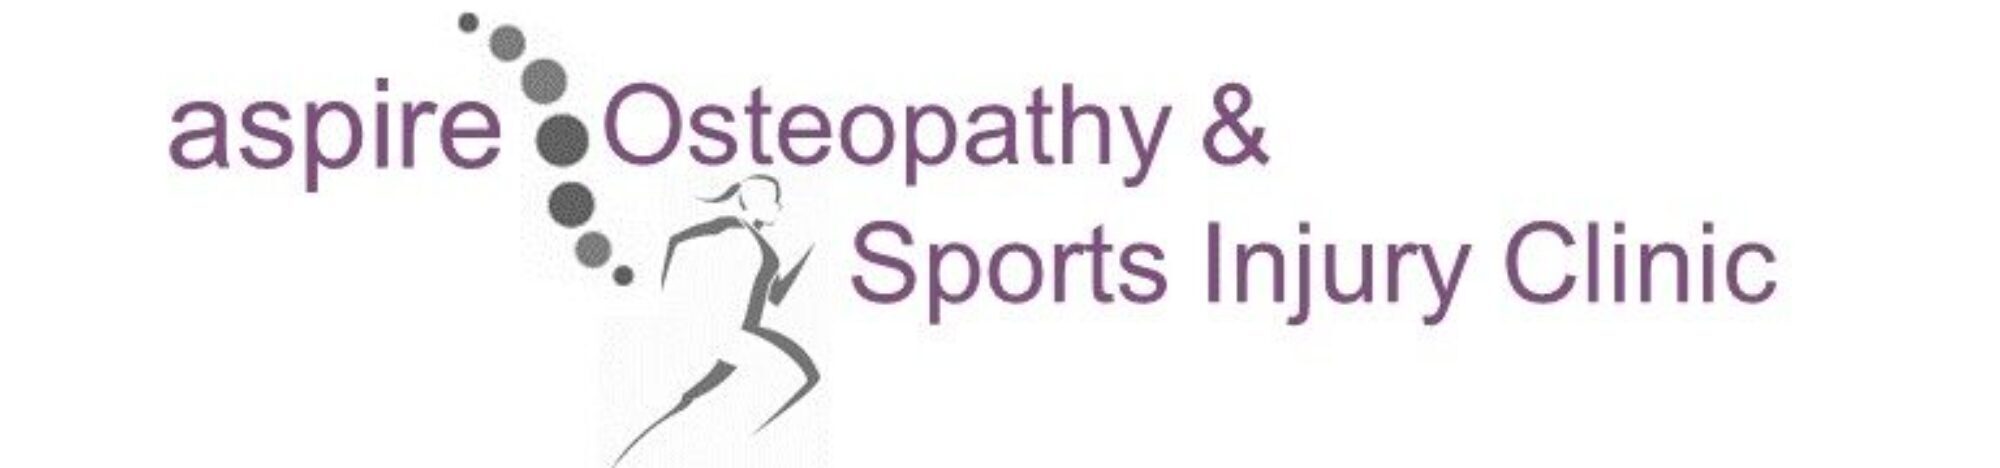 Aspire Osteopathy and Sports Injury Clinic